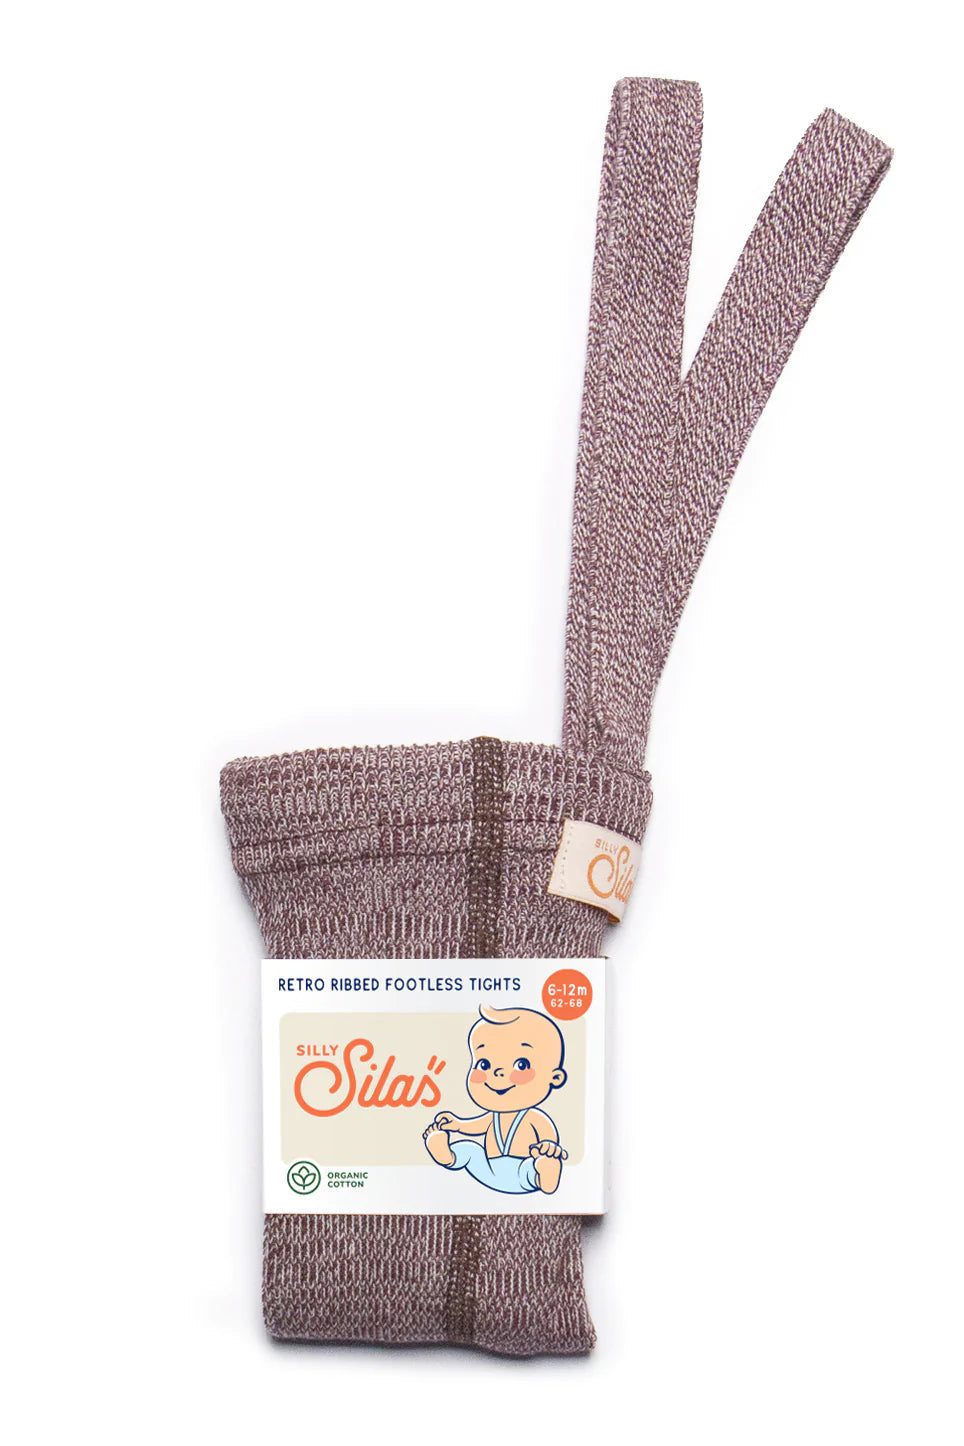 Silly Silas tights without feet wool cream 6-12 m – PSiloveyou